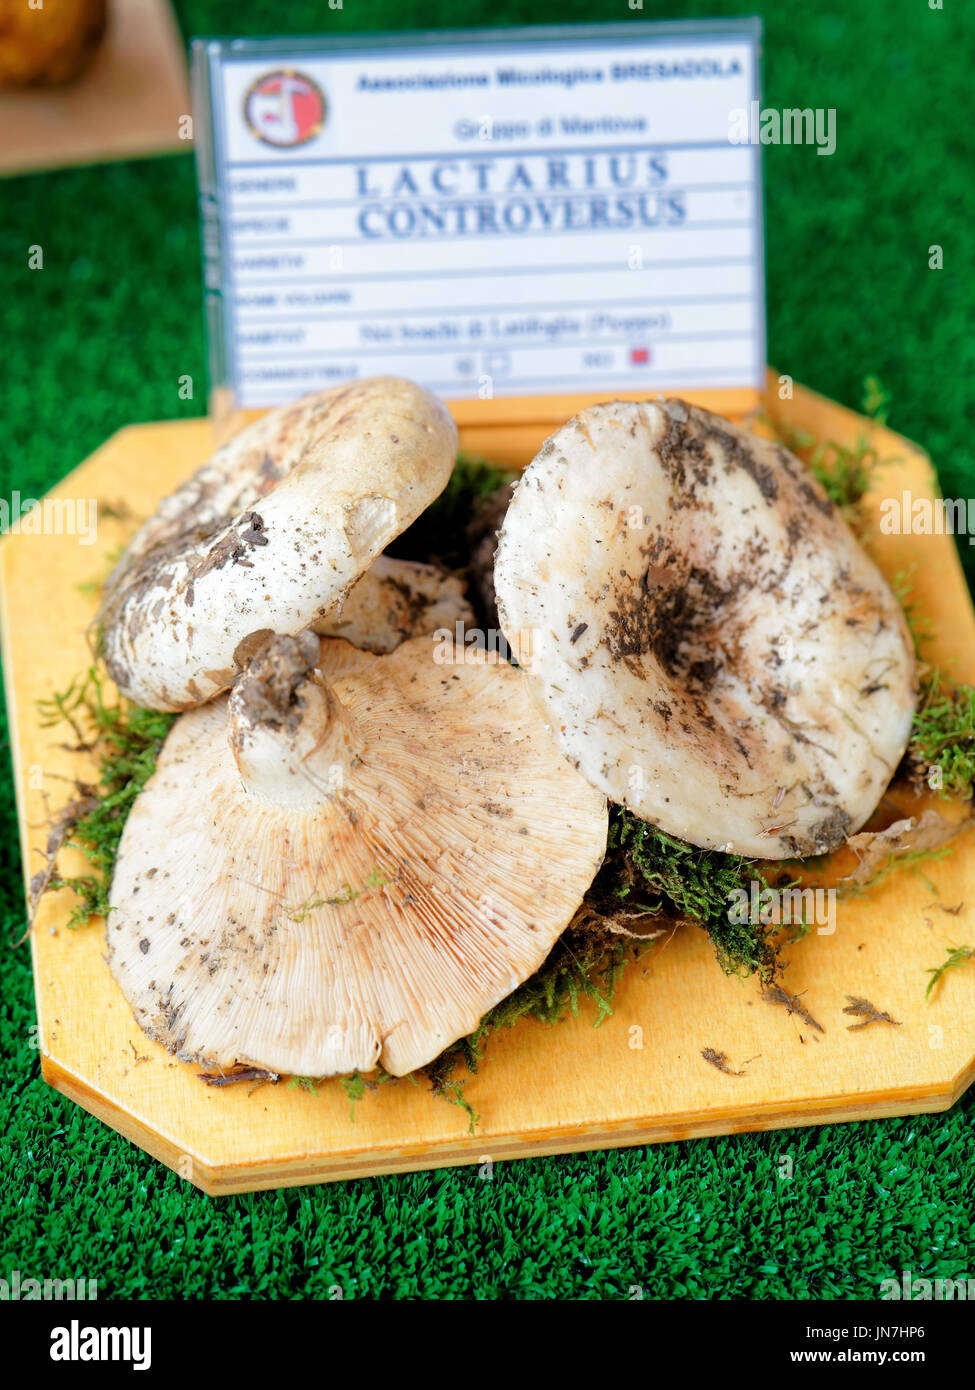 Mantua, Italy - October 22, 2016: Lactarius controversus at mycological exhibition of mushrooms in Mantua, Lombardy, Italy Stock Photo